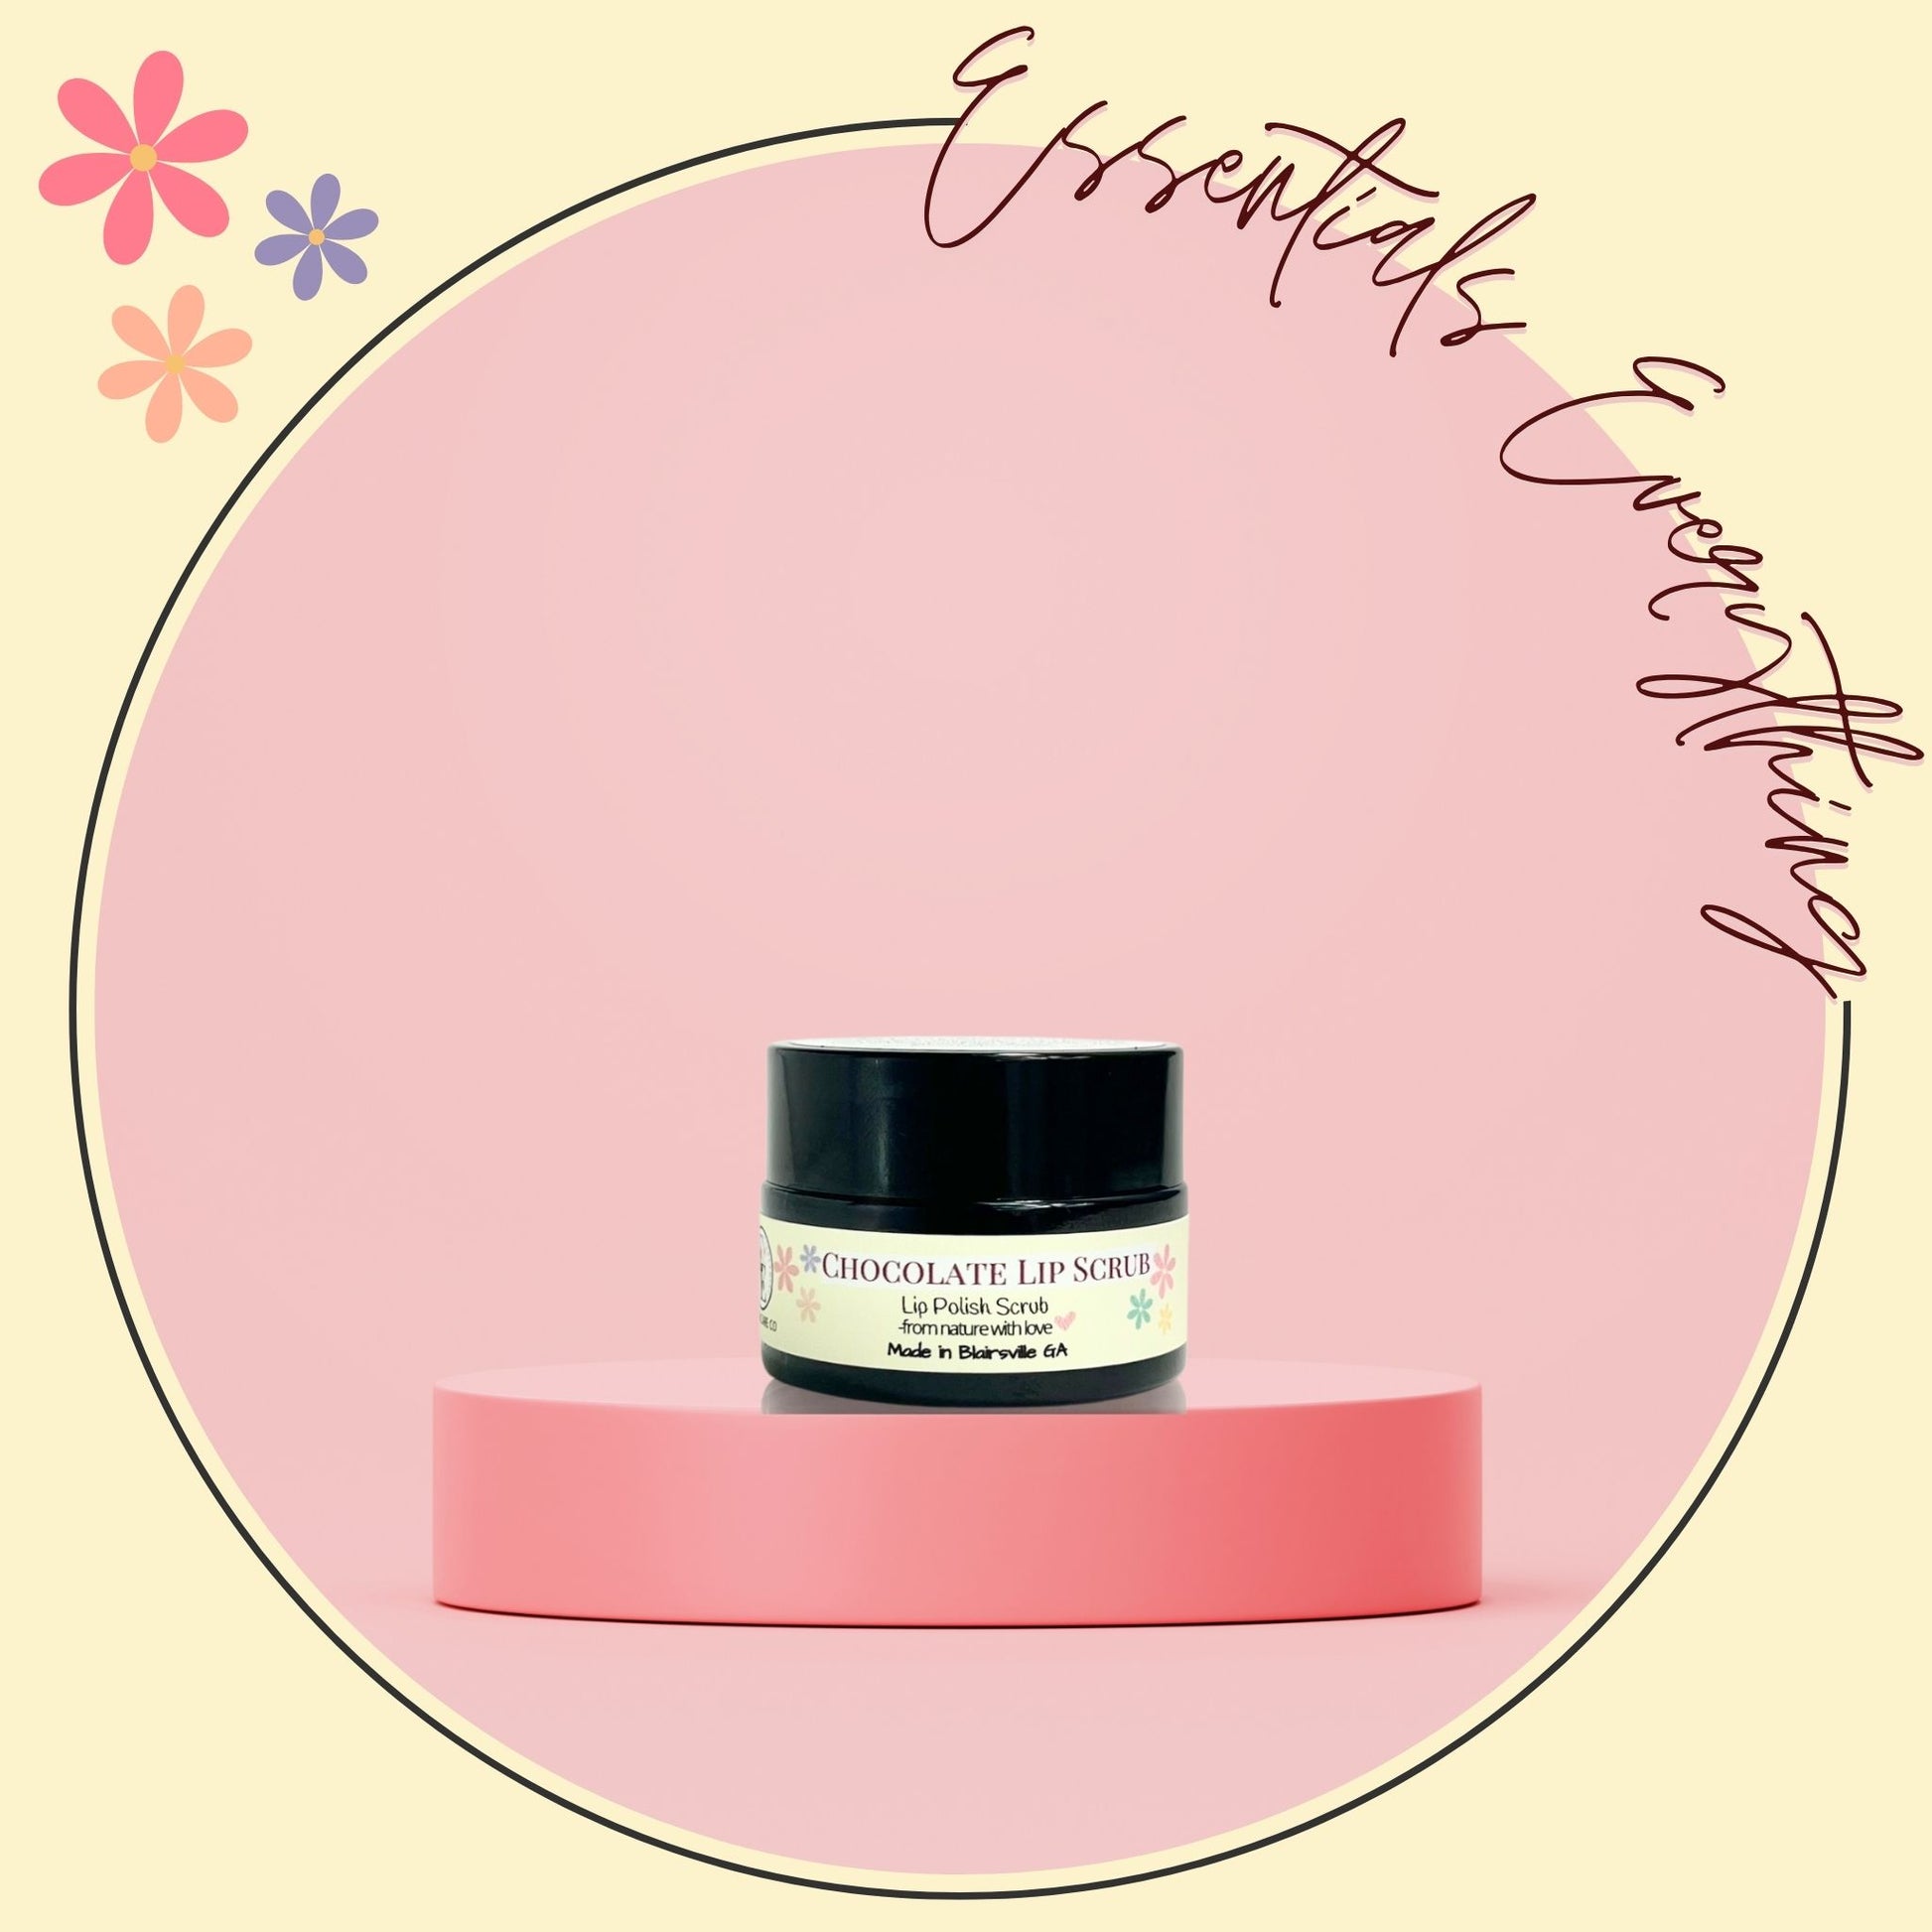 All-Natural Chocolate Lip Scrub by Essentials Everything Skin Care Co.